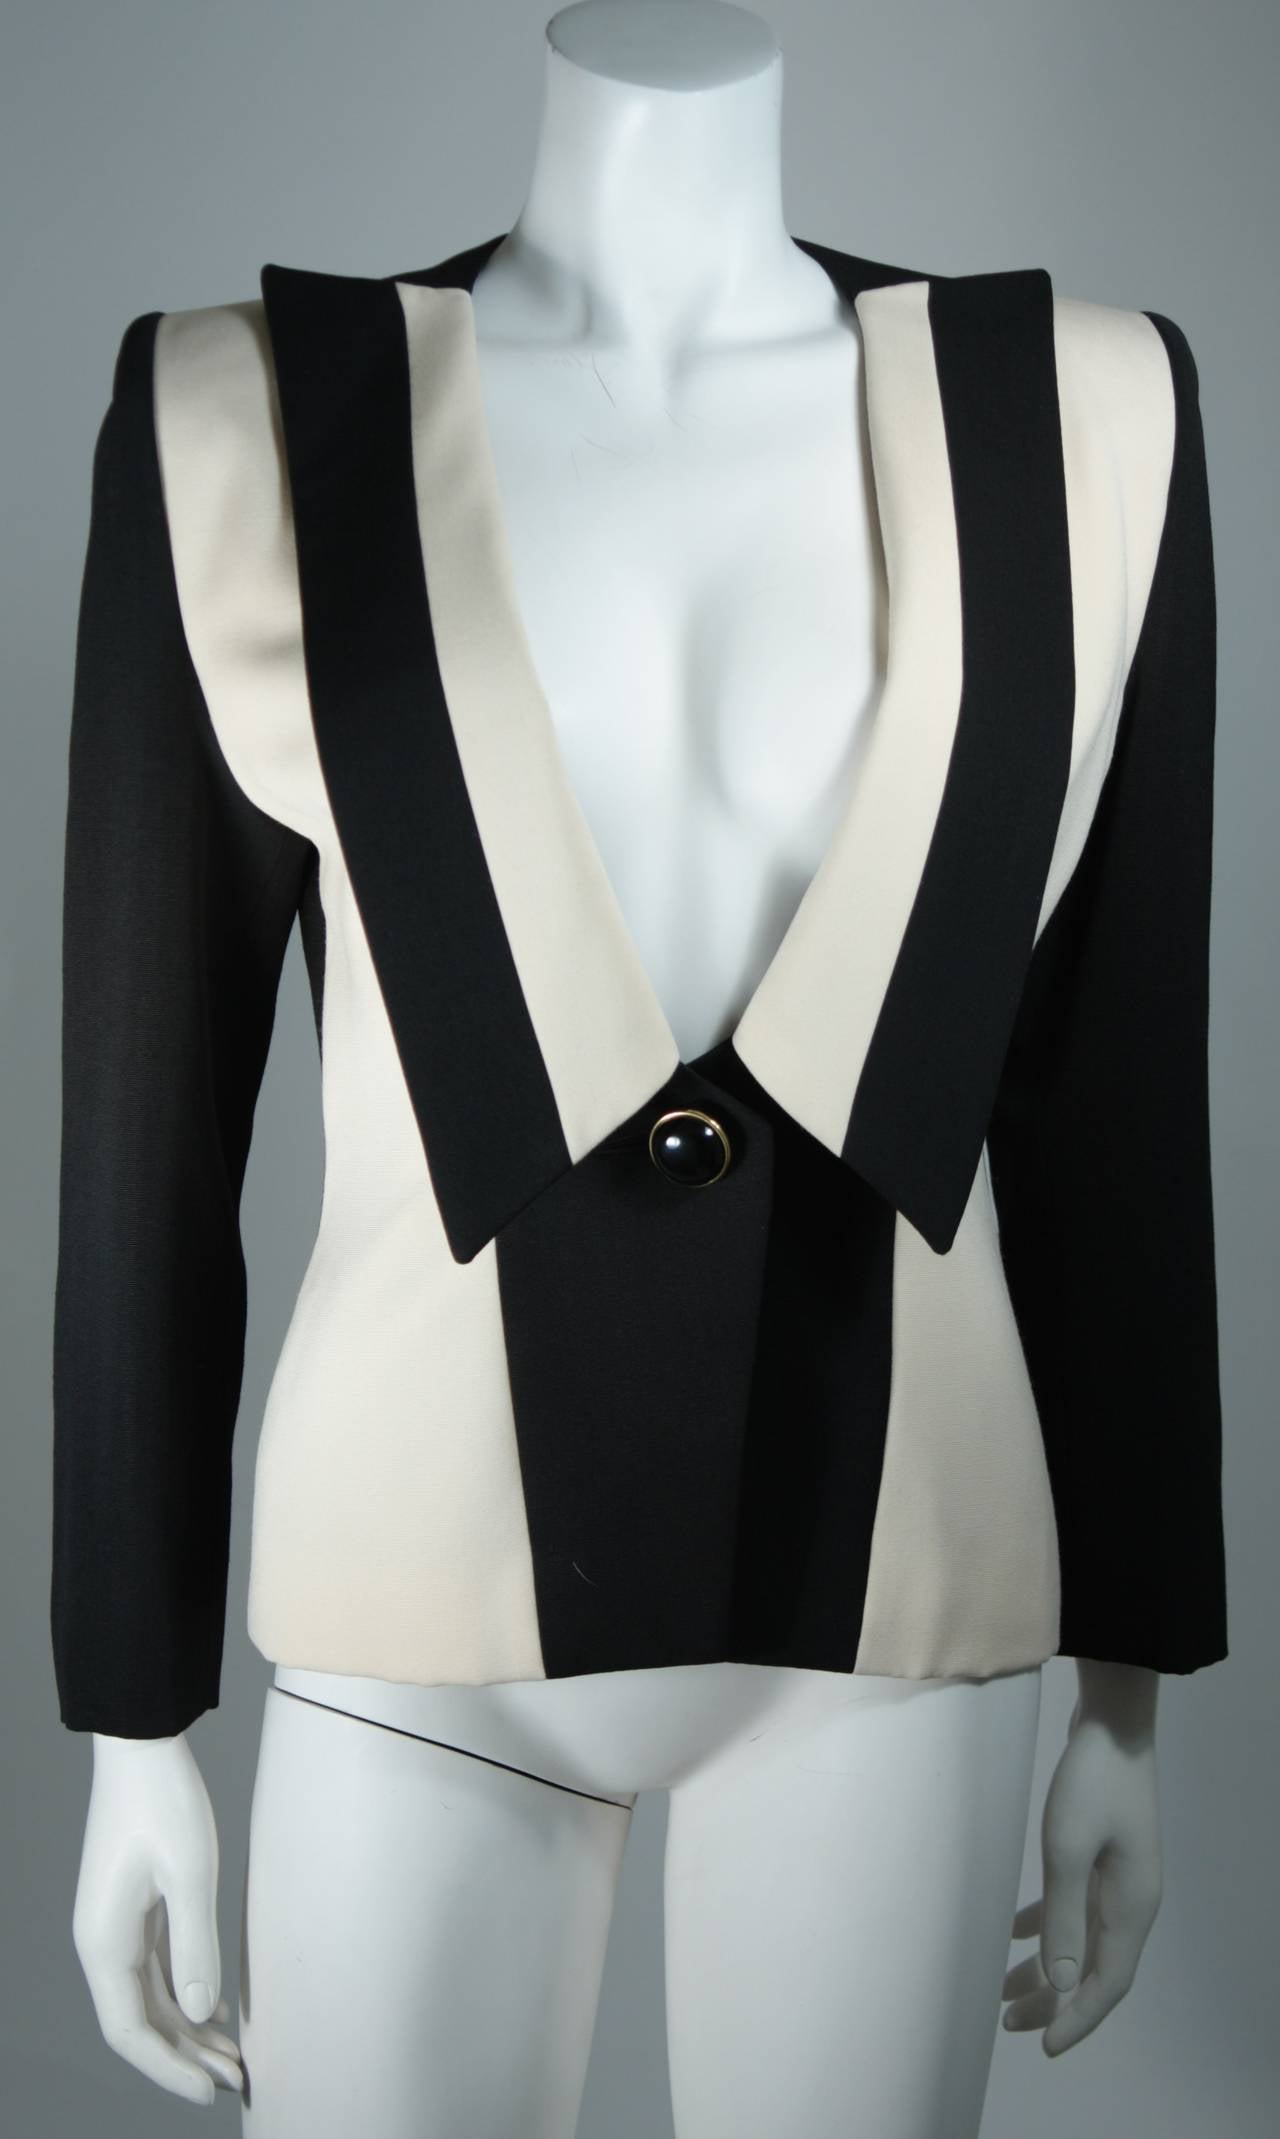 Galanos Couture Black and Off White Contrast Dress Suit Ensemble Size 4 6 4